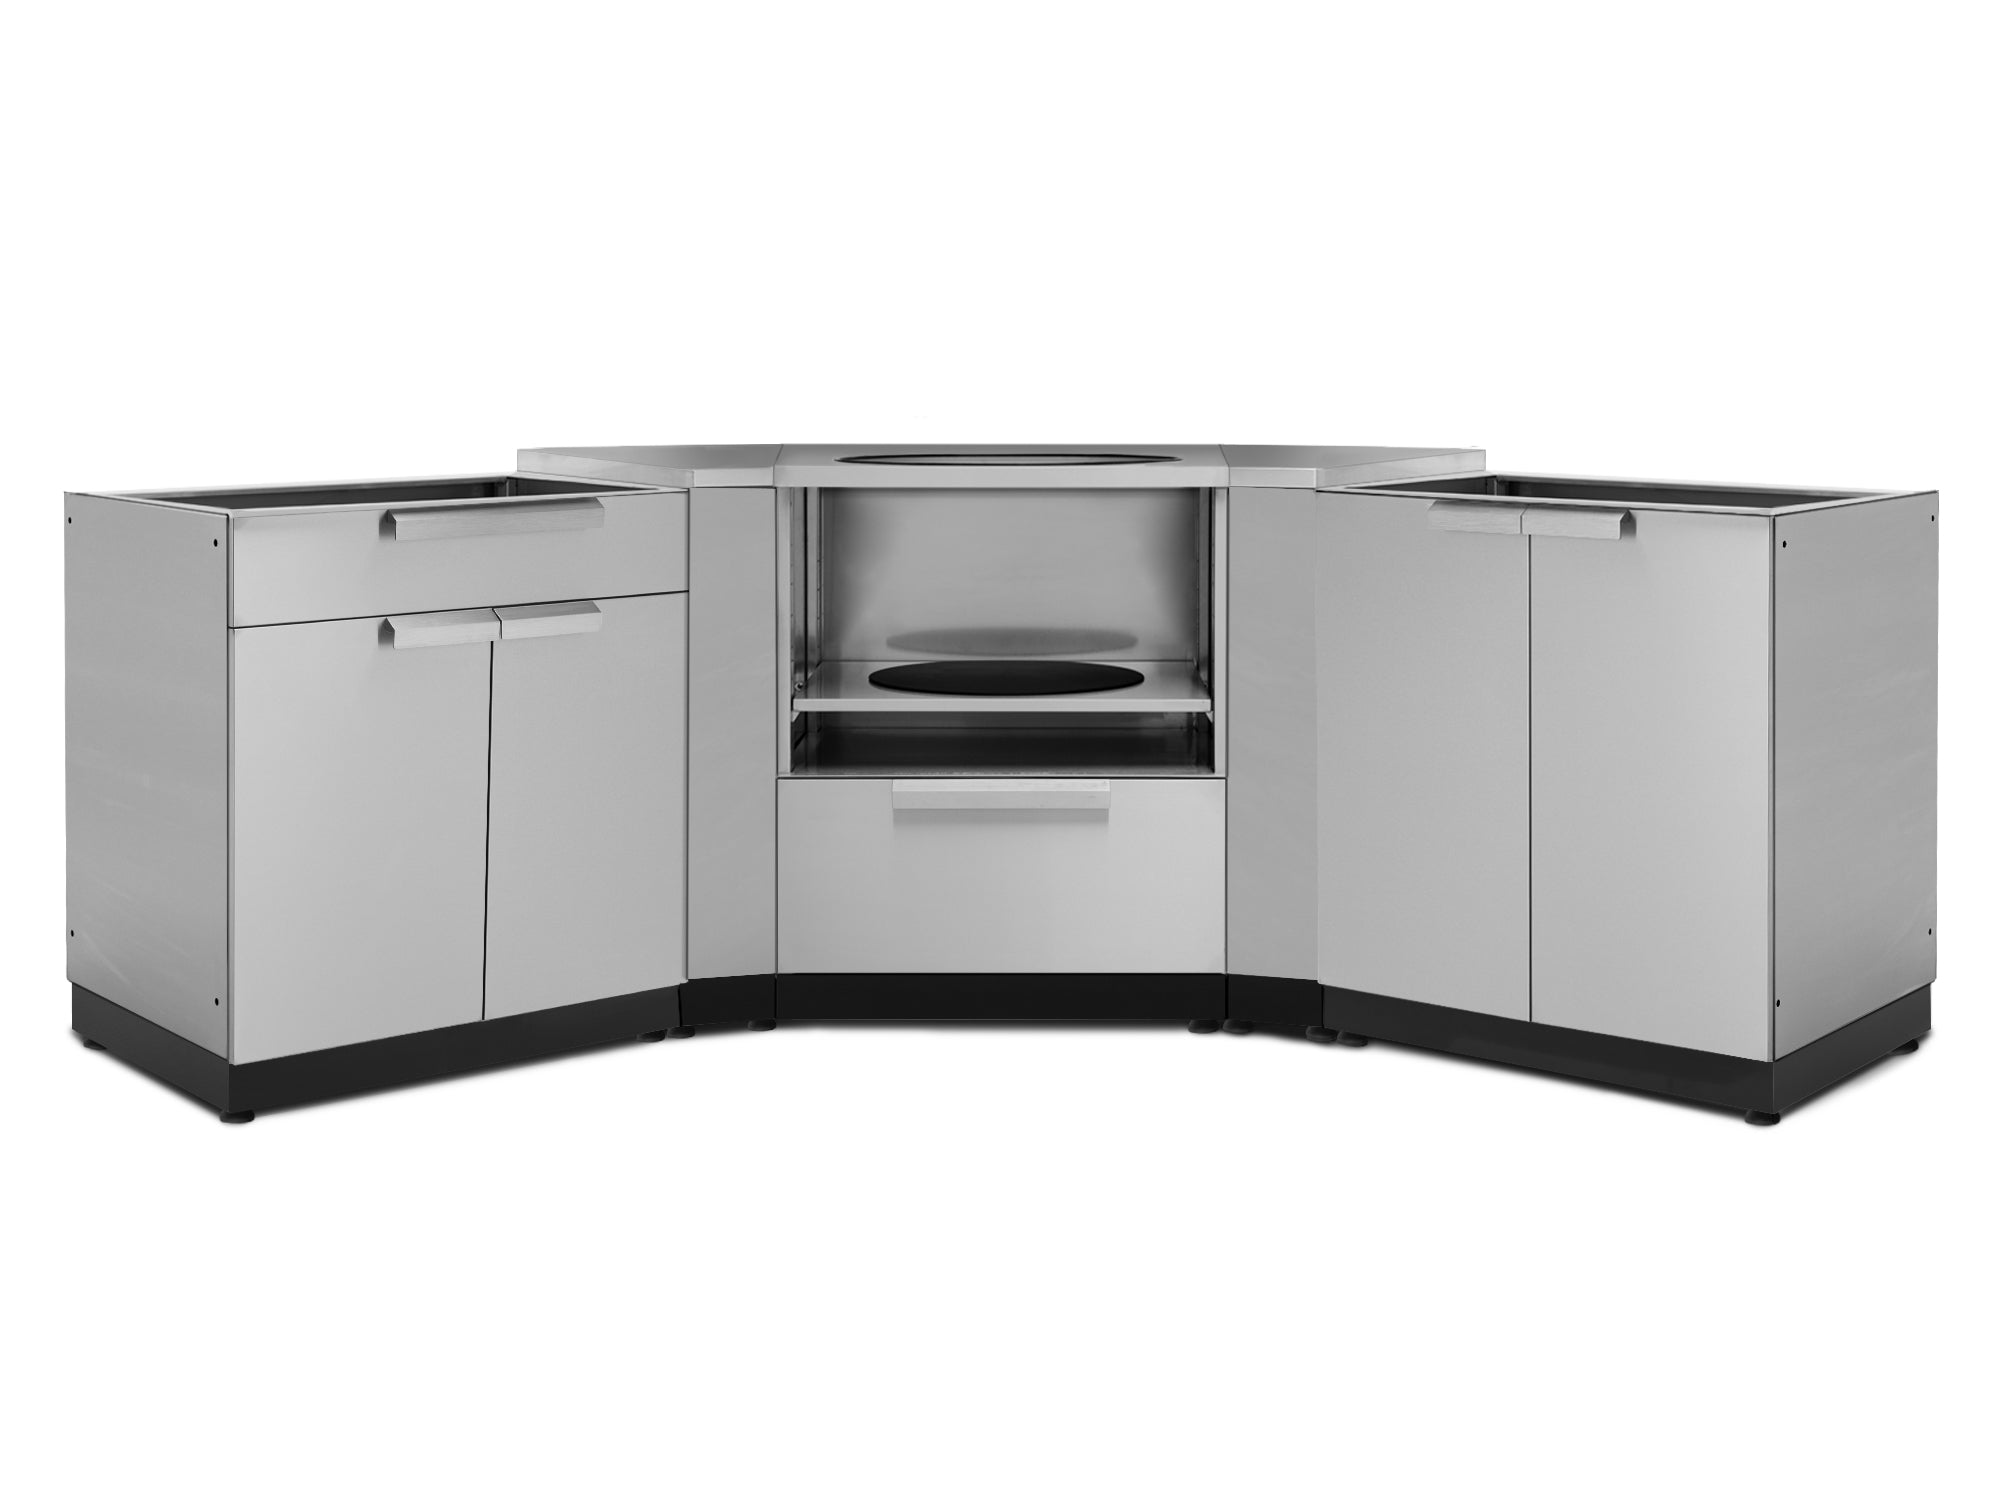 Casa Nico Portable Stainless Steel Outdoor Kitchen Cabinet & Patio Bar